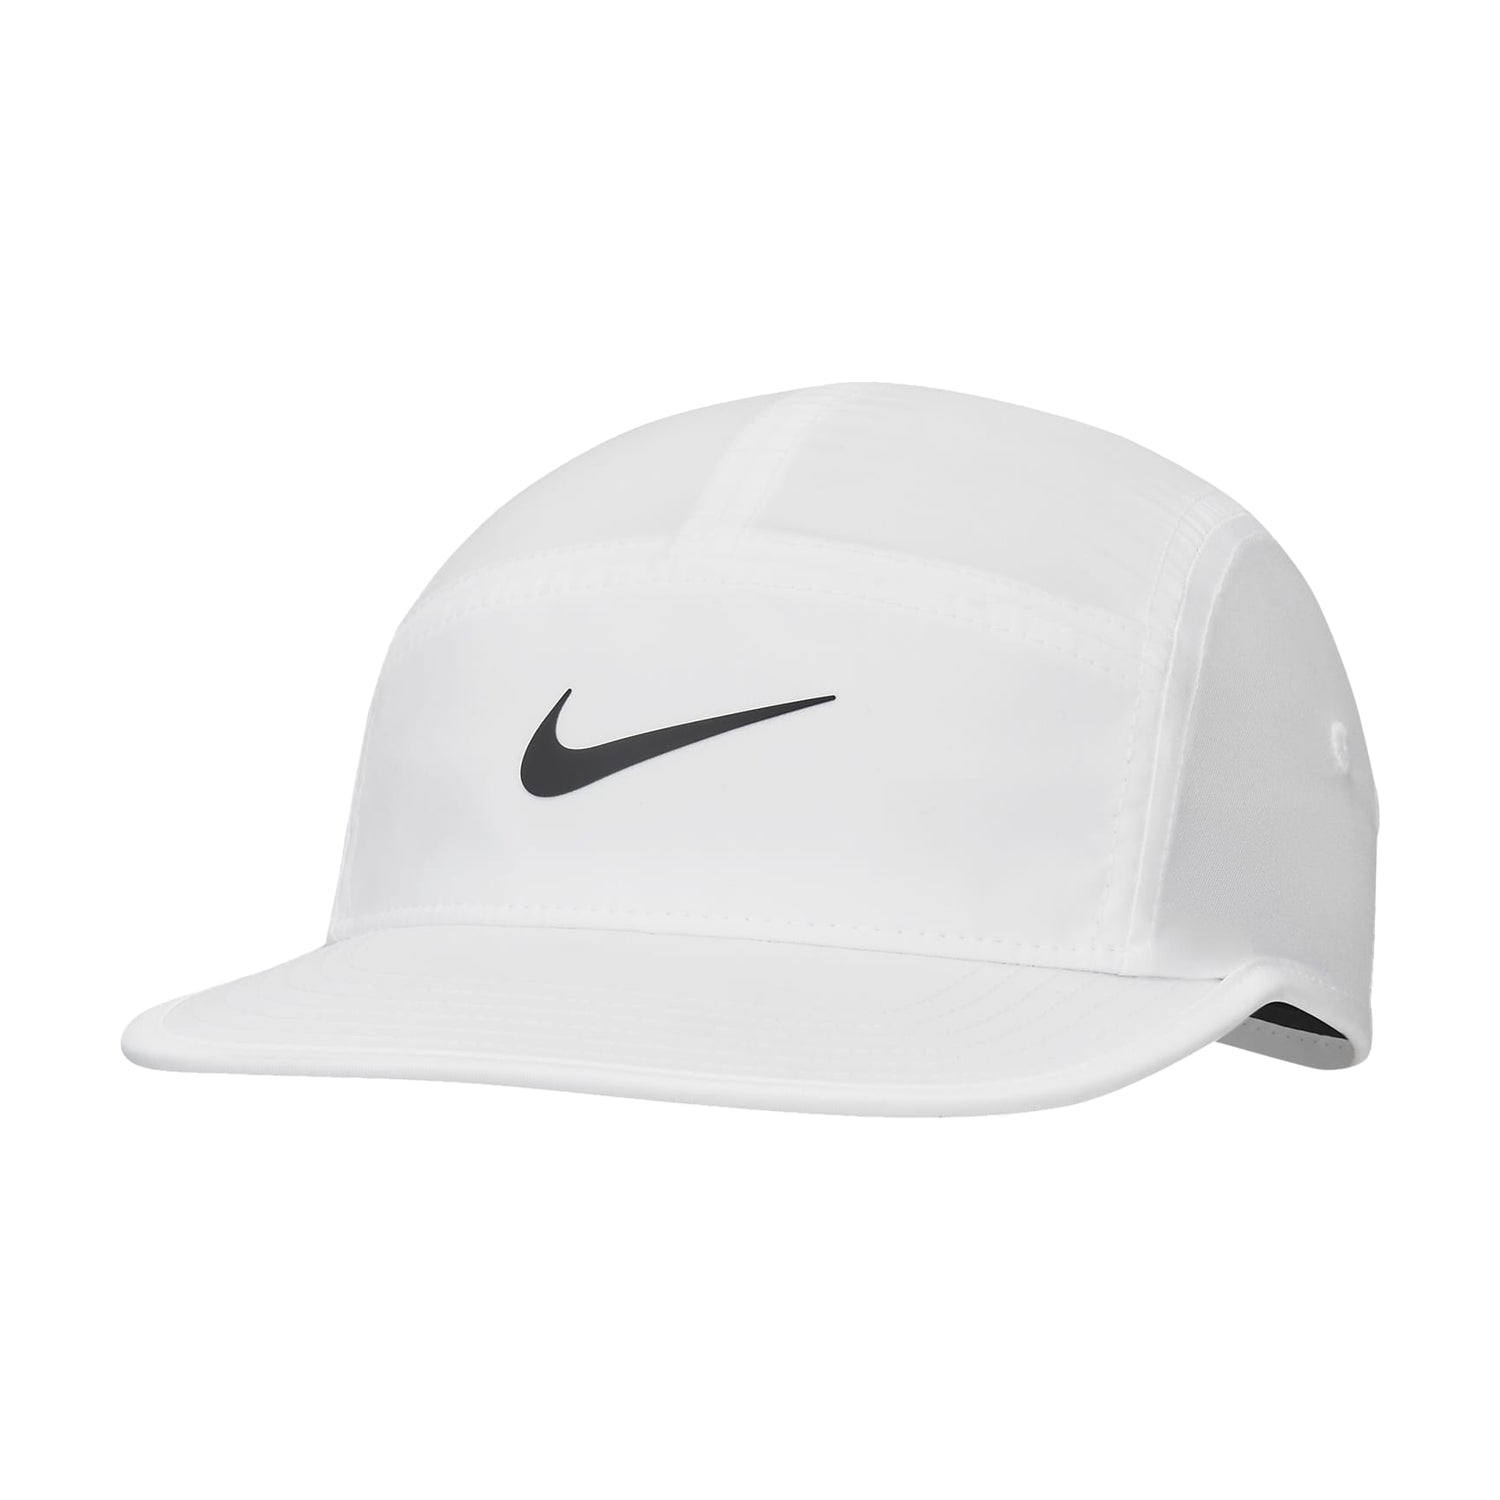 NIKE DRI-FIT FLY HAT WHITE / ANTHRACITE / BLACK